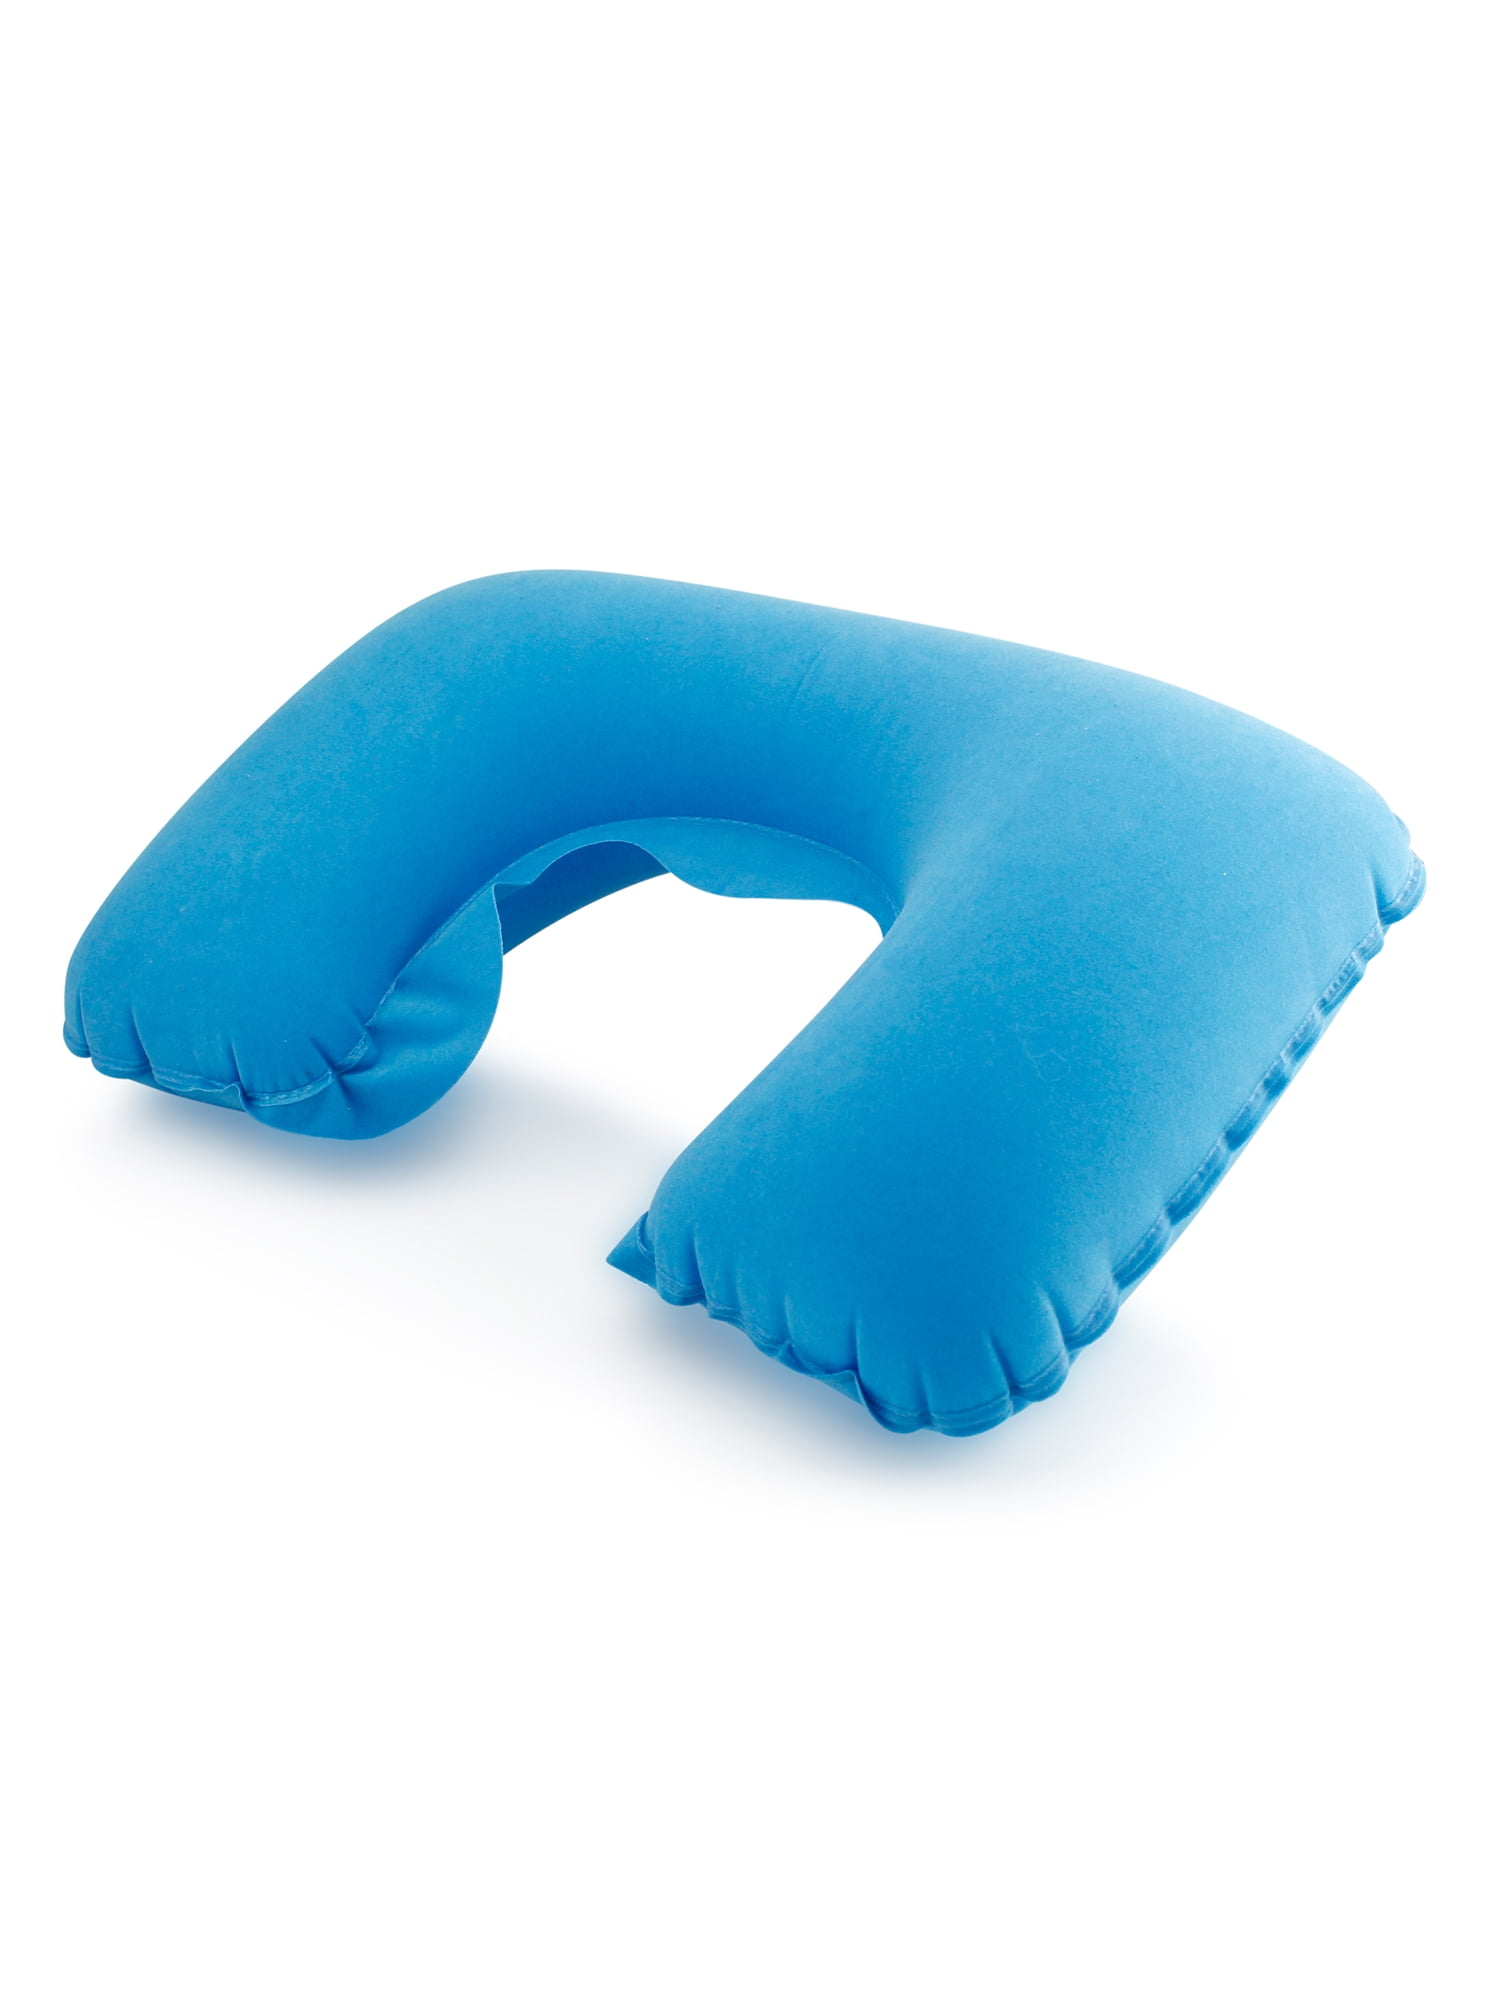 2 Pack Cute Inflatable Travel Pillow Neck U Rest Compact Plane Blue 